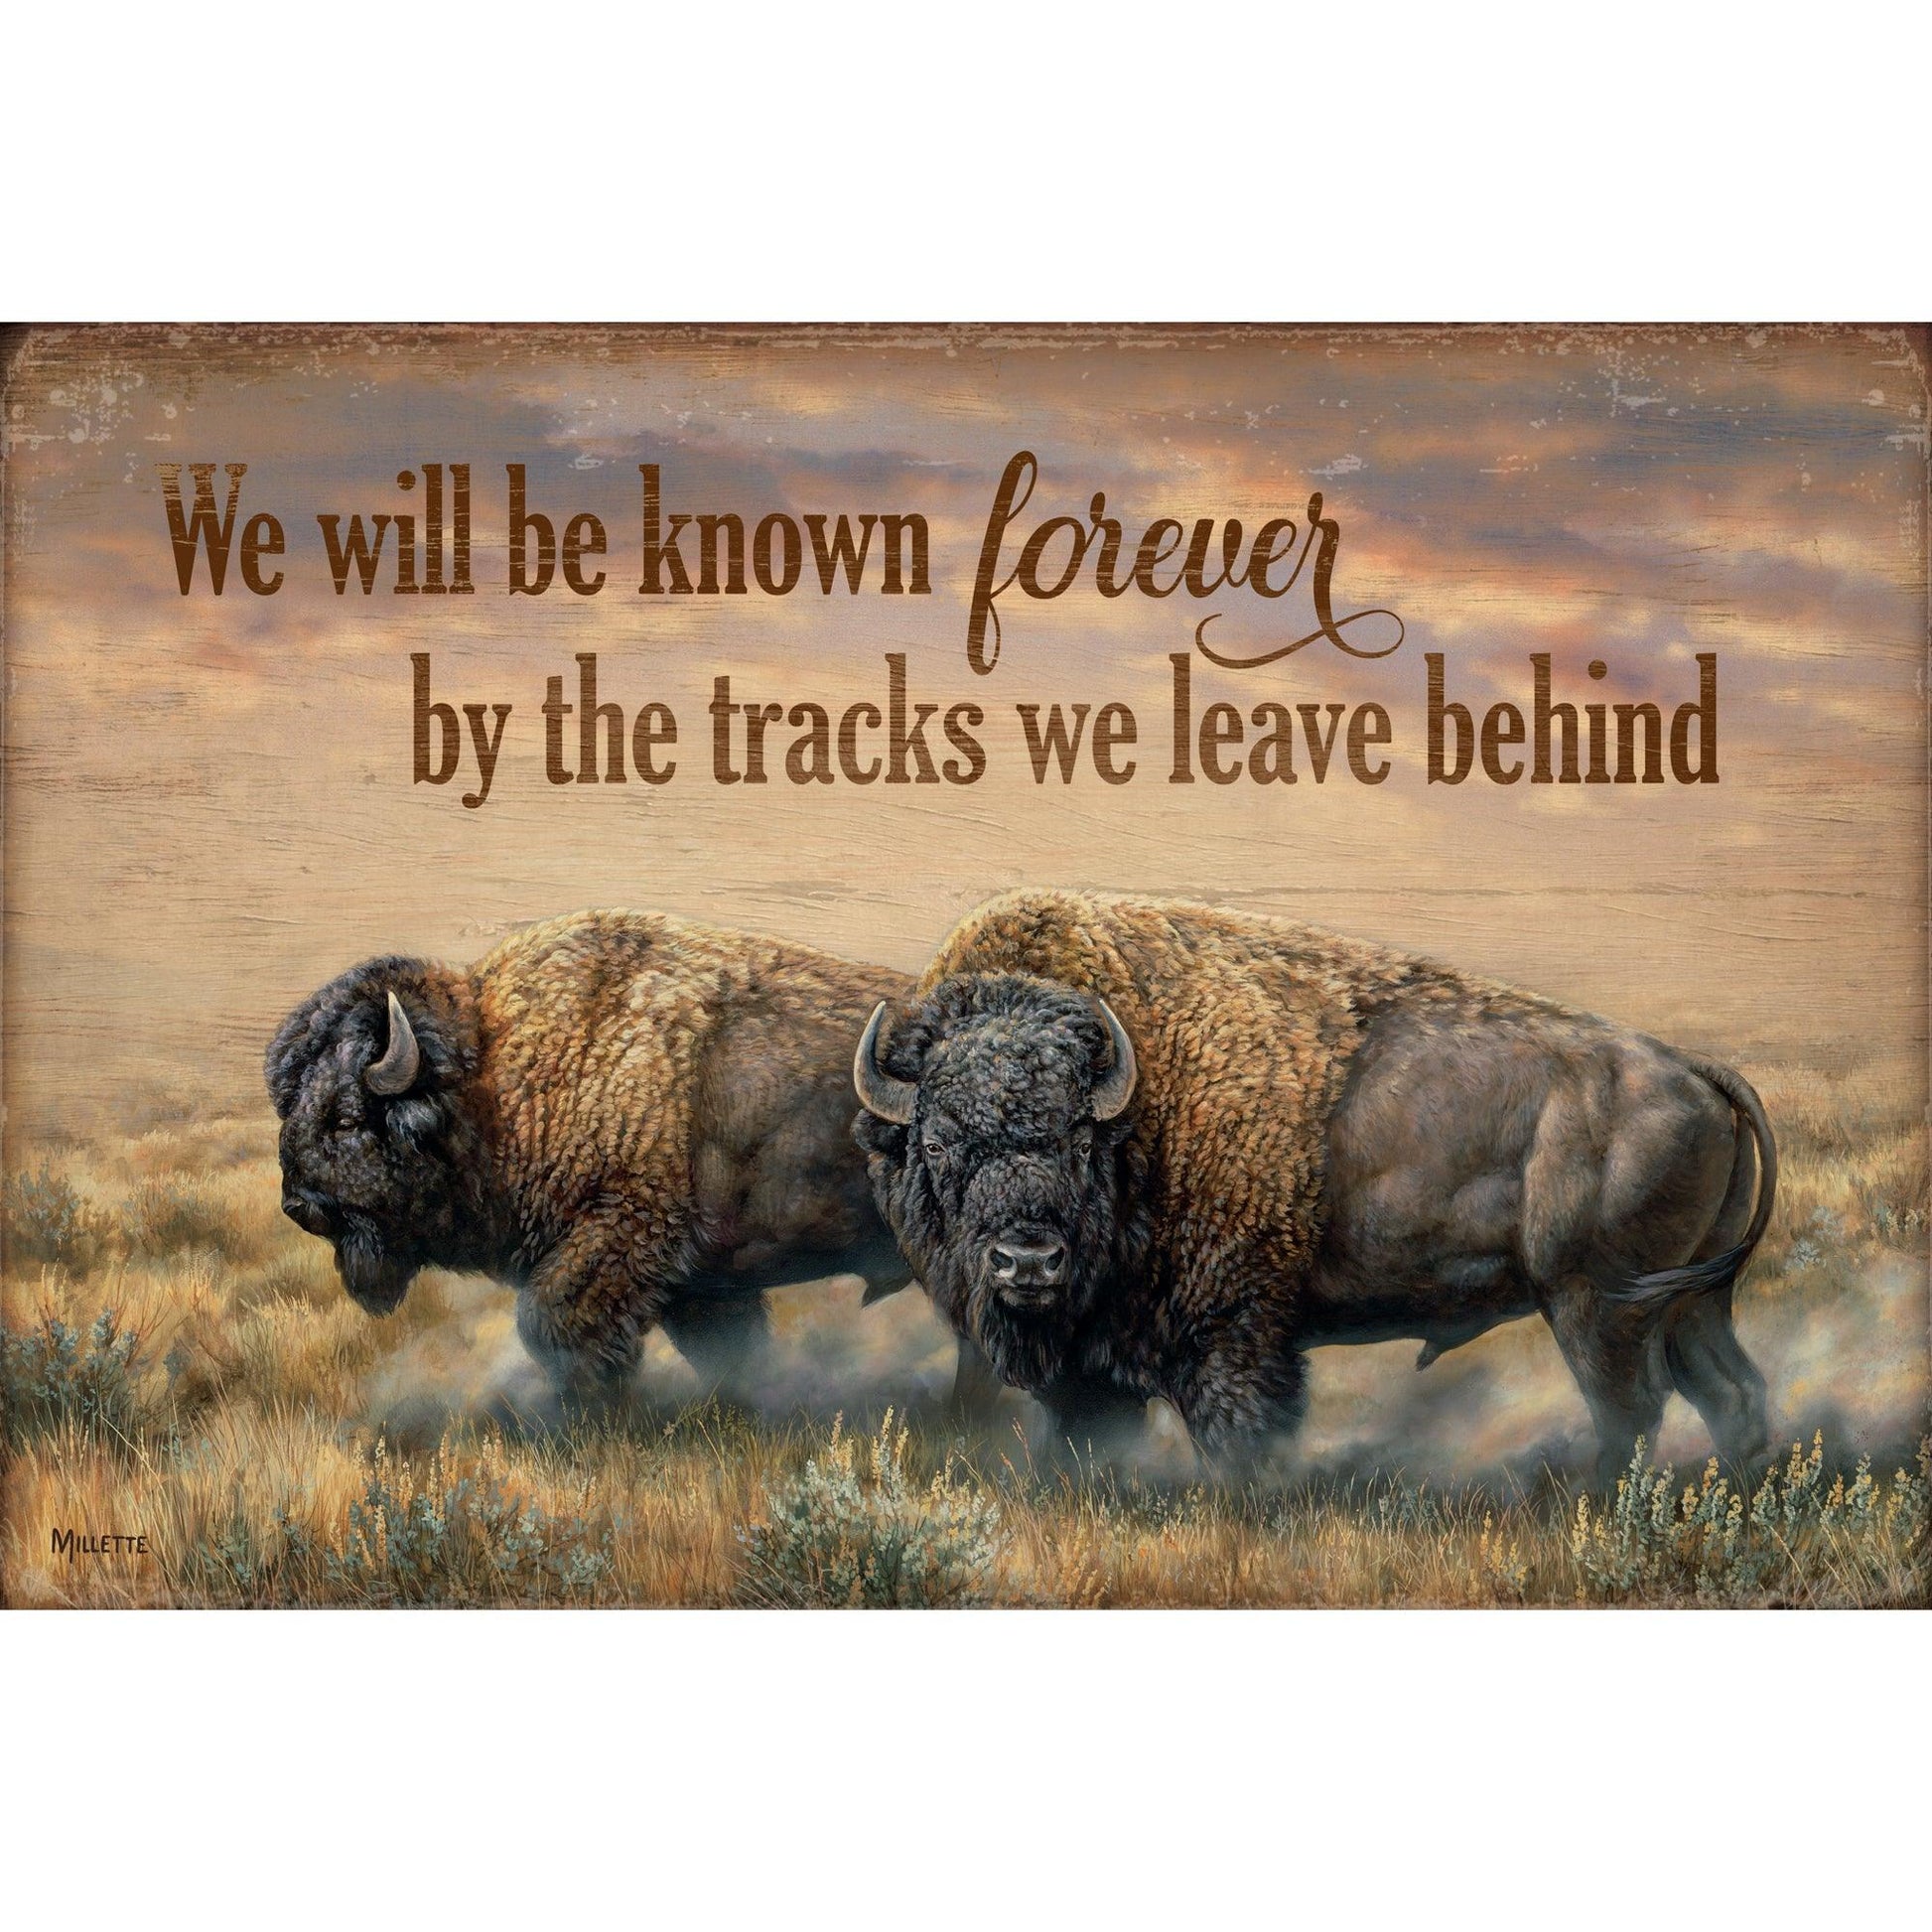 Along came lions in the wild - song and lyrics by Teeko